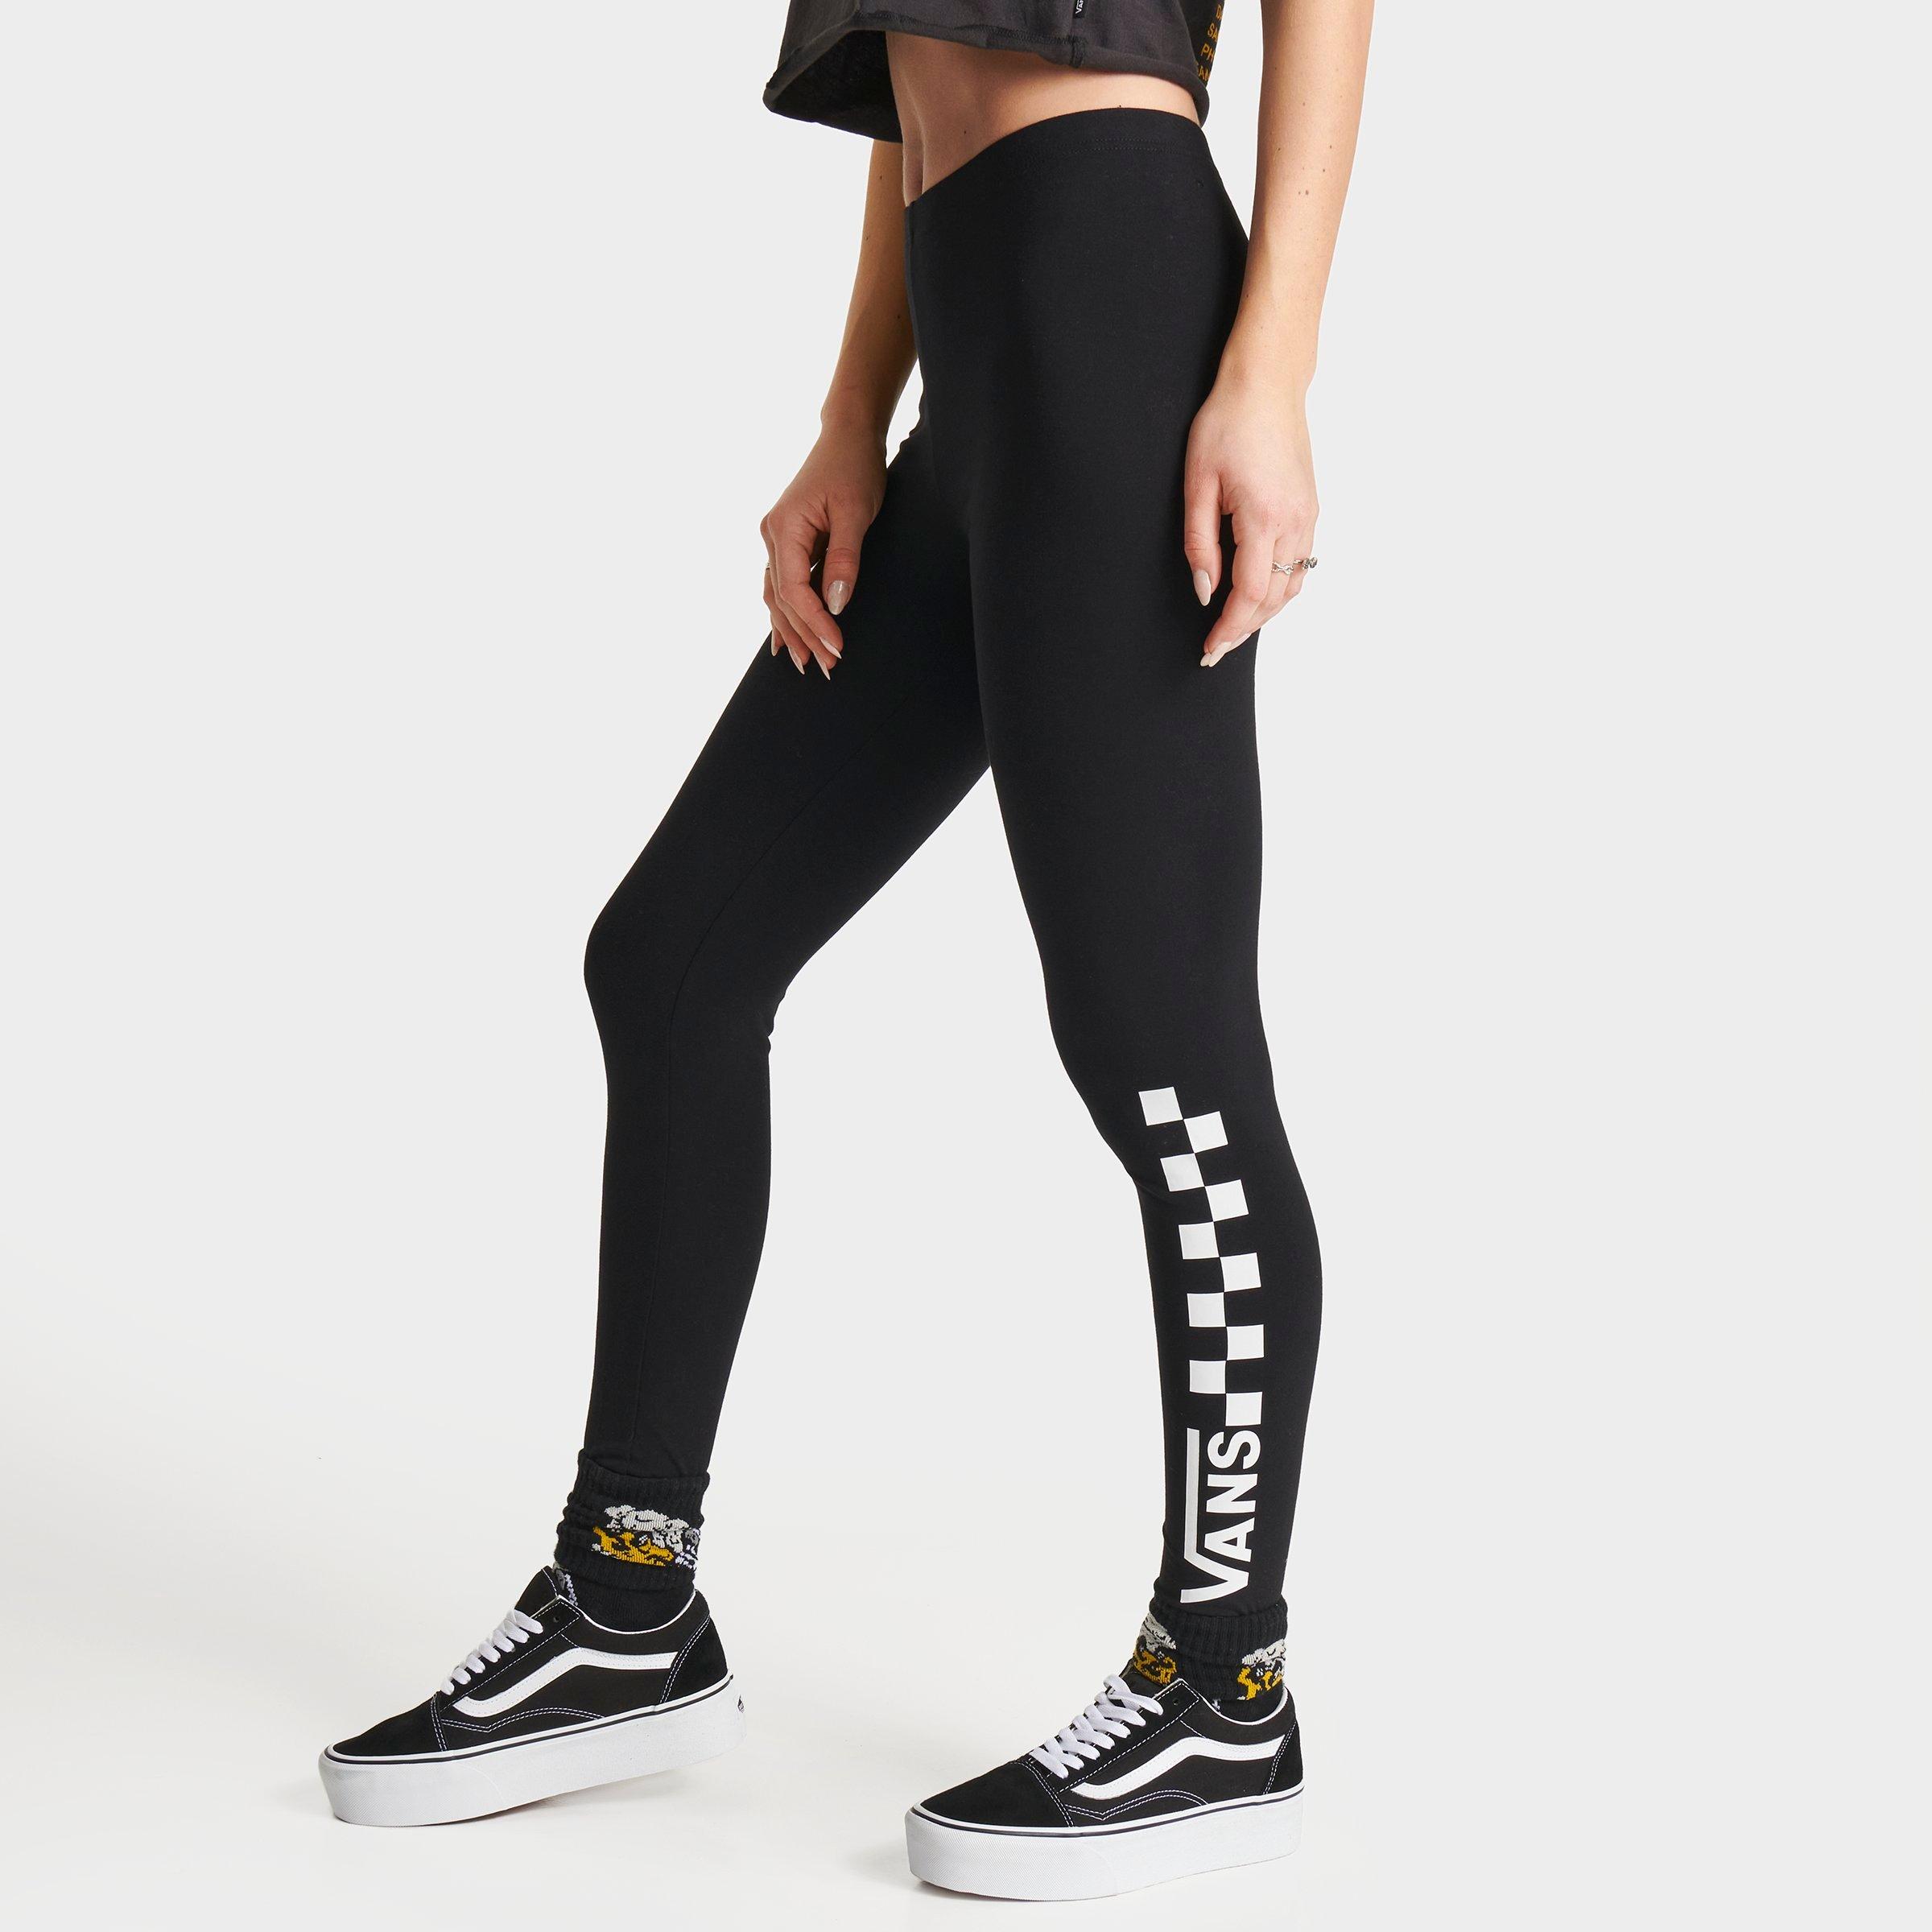 Shop JD Sports Women's High Waisted Leggings up to 65% Off